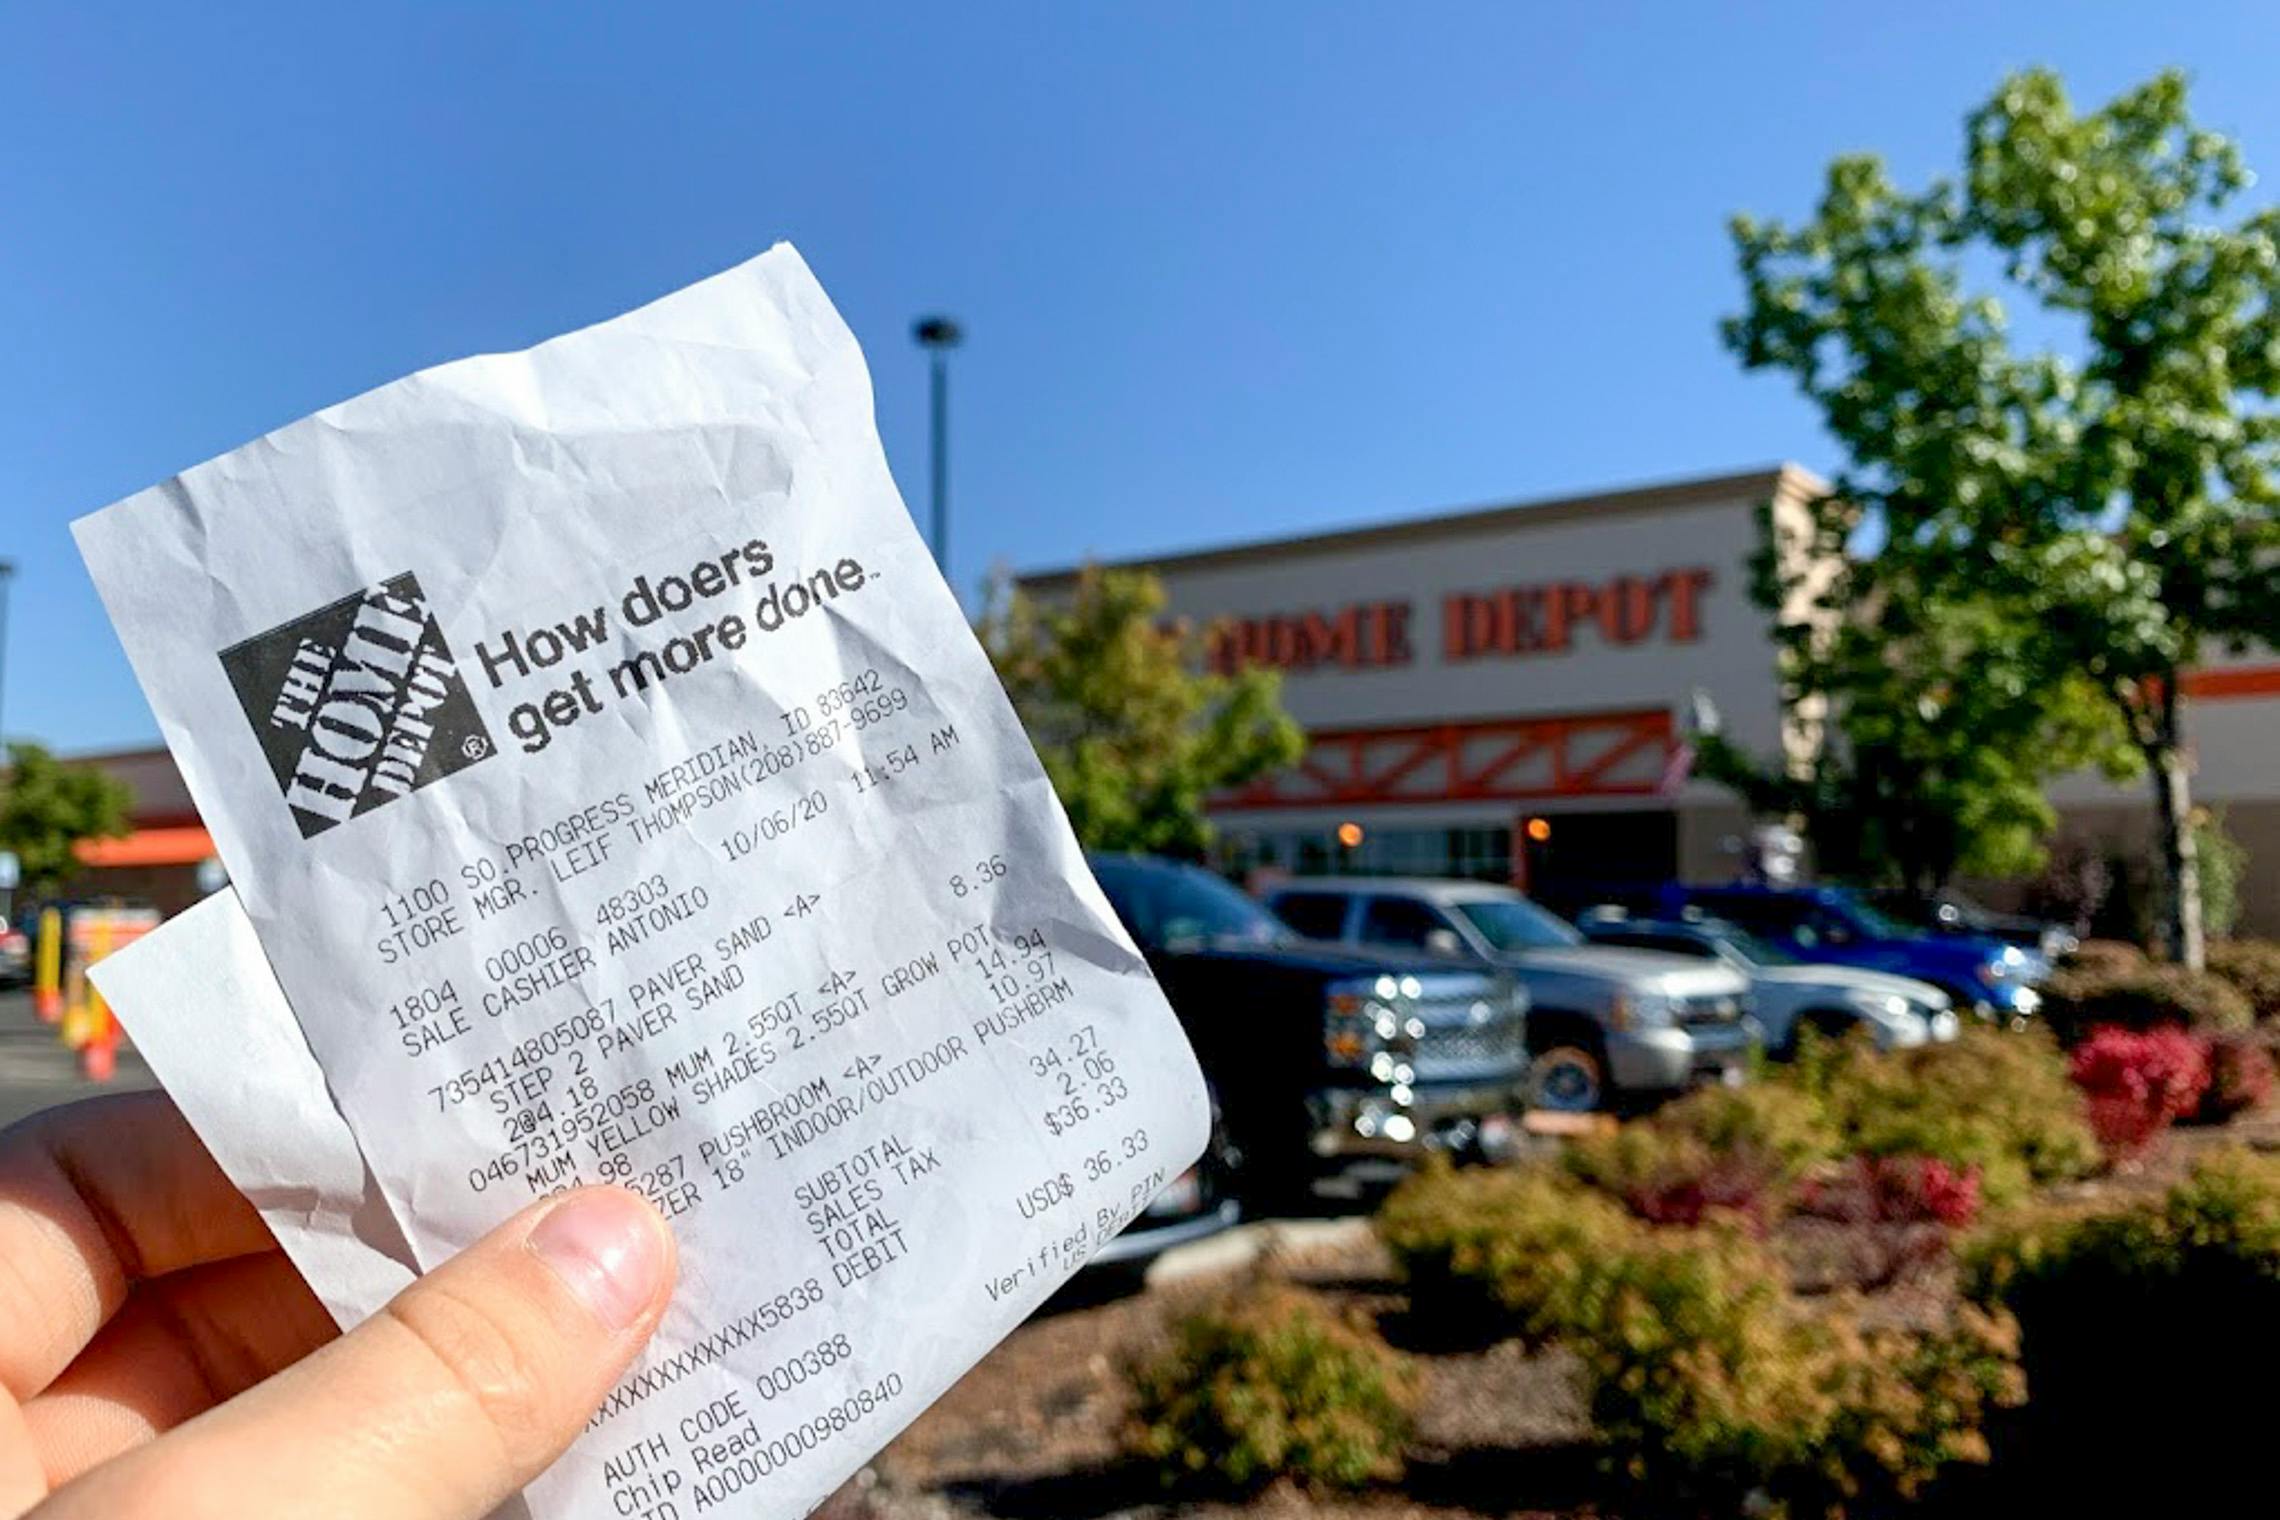 Someone holding up their Home Depot receipt in front of a Home Depot store.